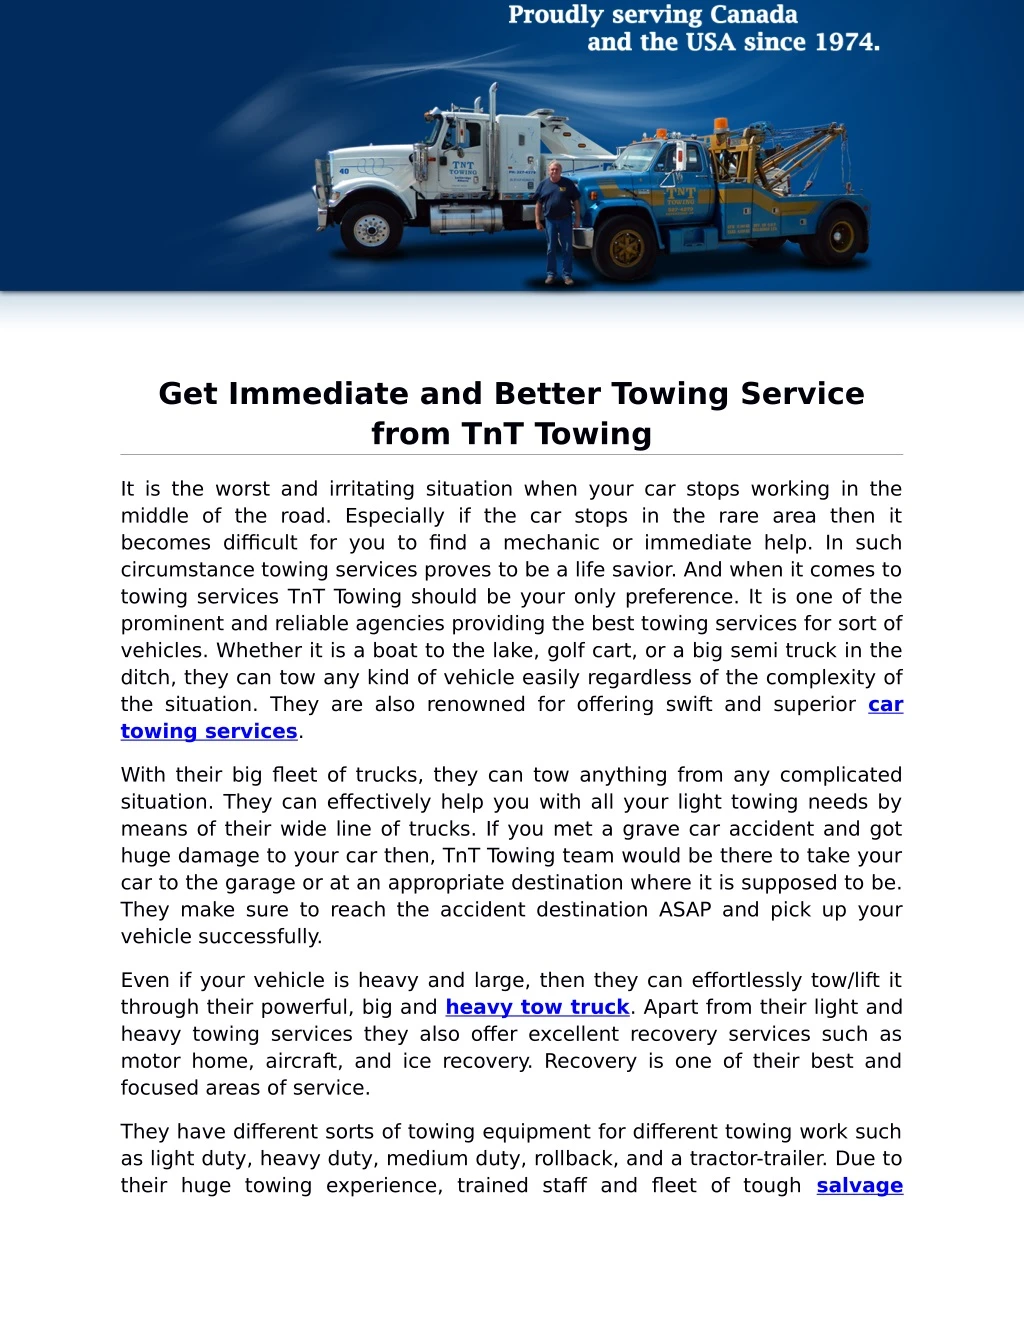 get immediate and better towing service from